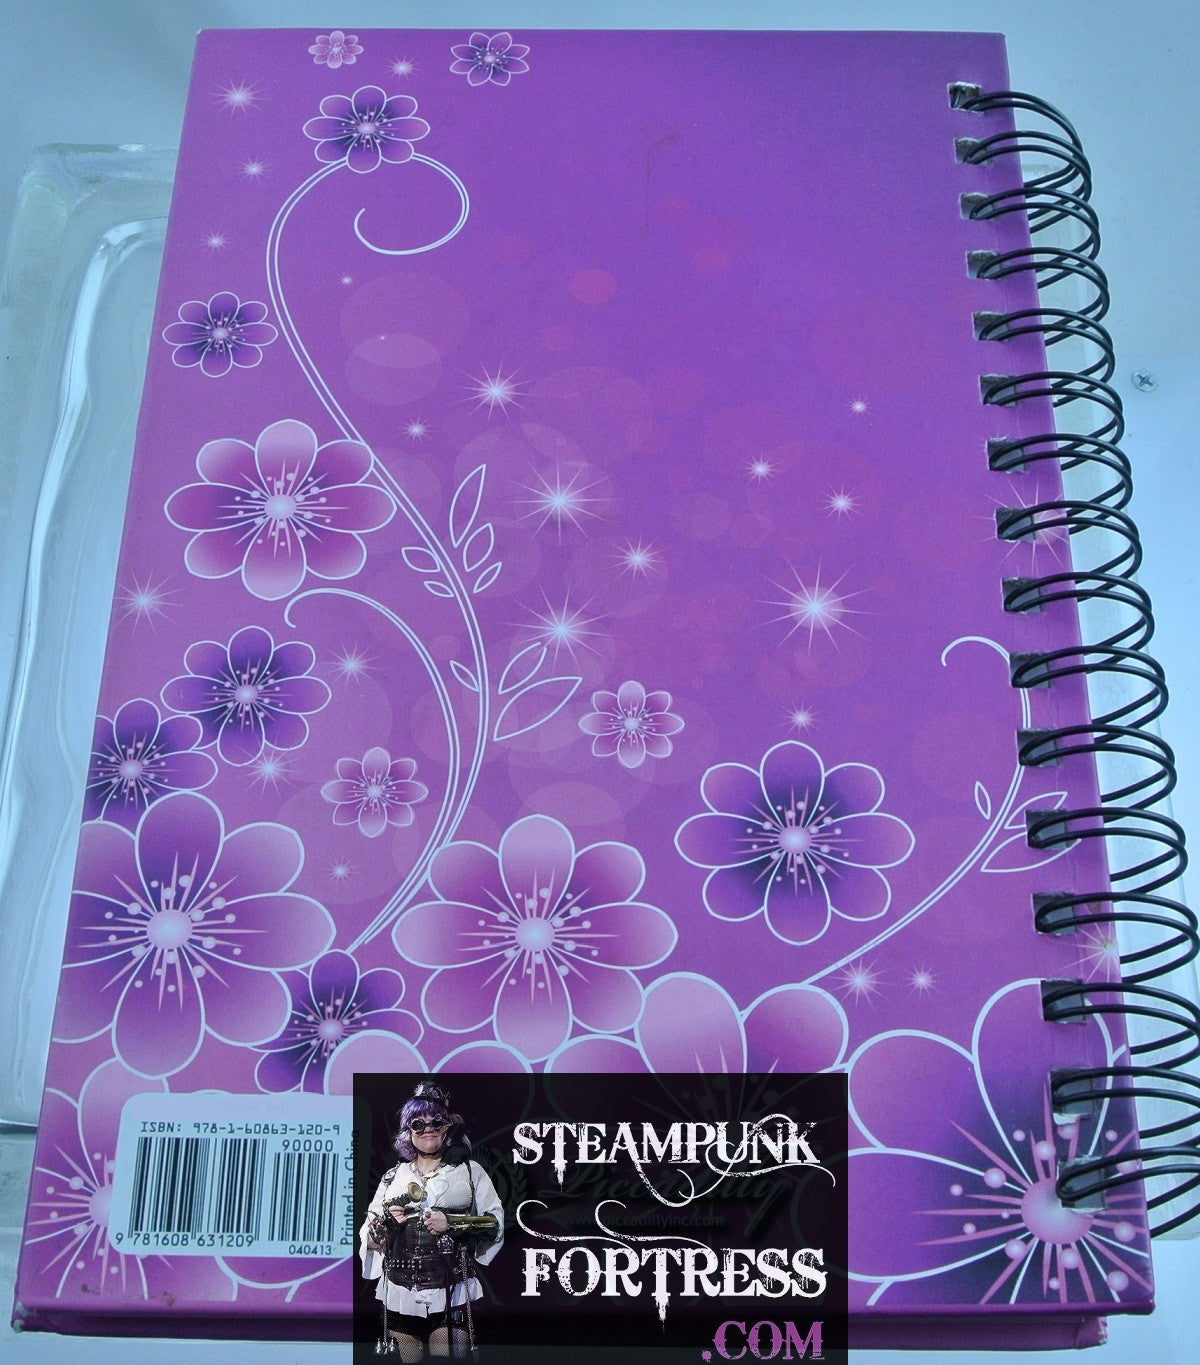 NOTEBOOK SPIRAL HARDCOVER PURPLE LAVENDER FLOWERS 118 LINED PAGES TOTAL